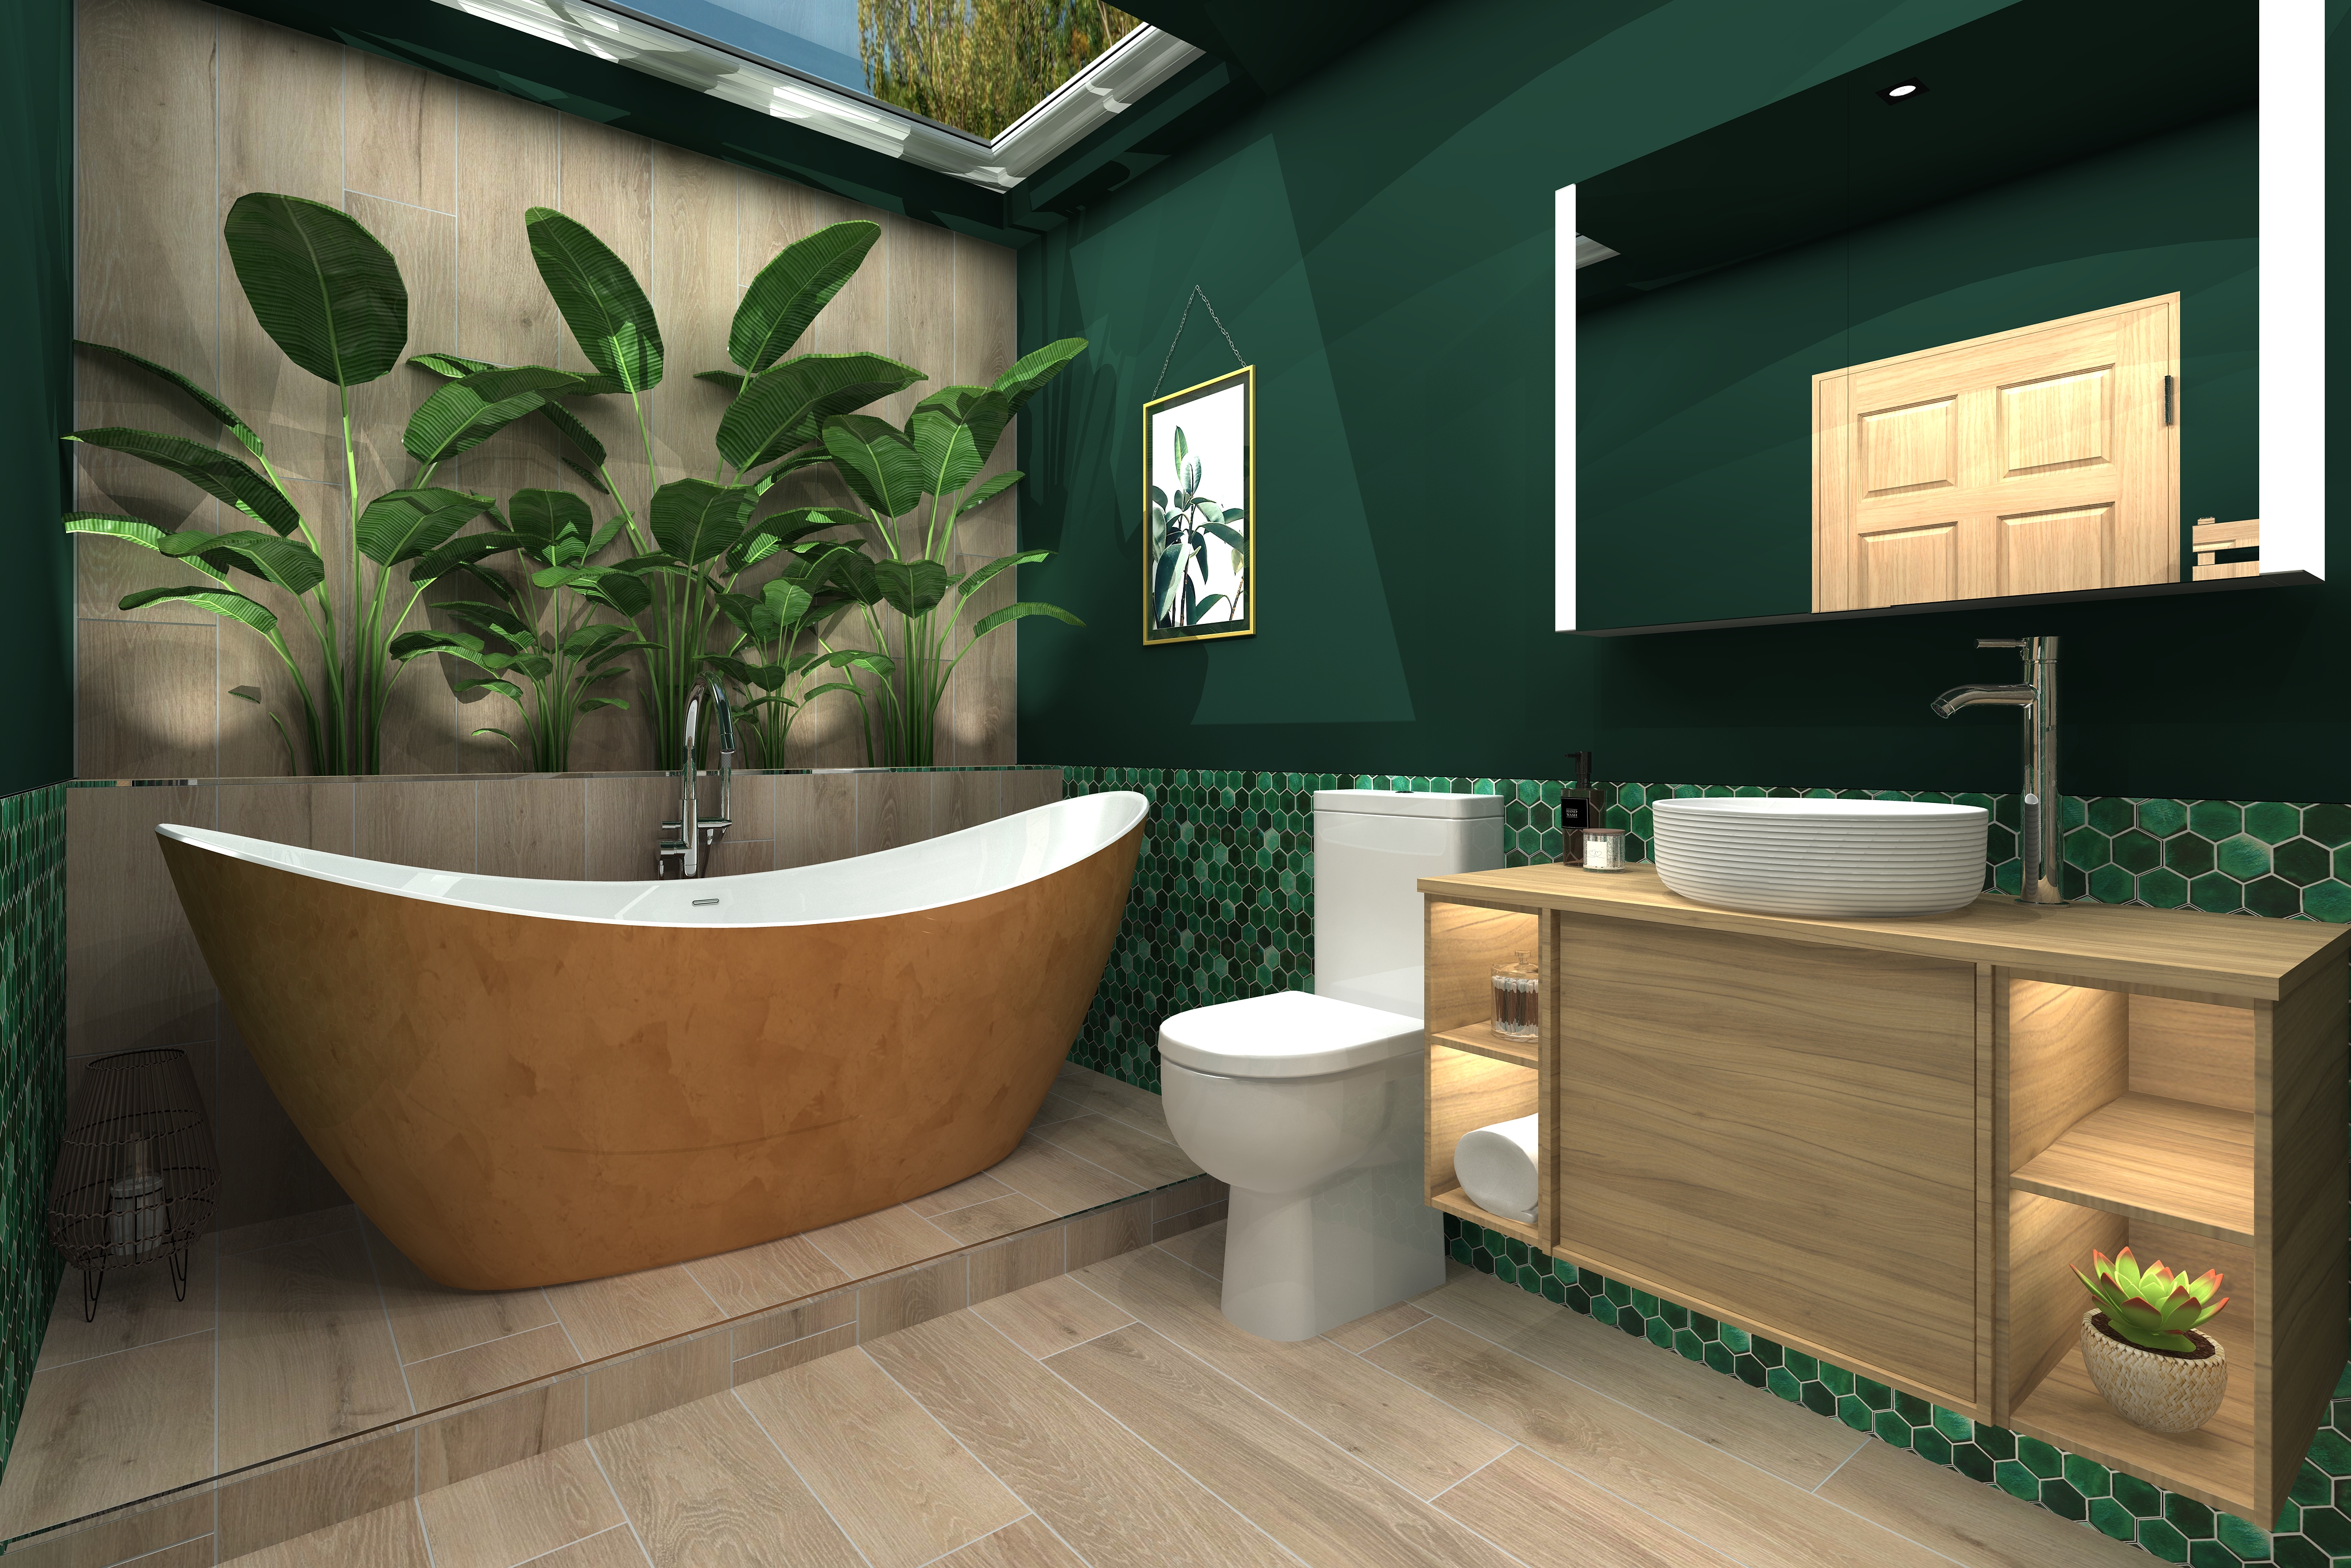 Close up digital lifestyle image of the Taurus inspired bathroom, with wooden wall mounted vanity unit, fluted countertop basin paired with a tall chrome mixer tap, brushed brass boat bath paired with a floorstanding chrome bath tap with handshower attachment and decorative fiddle-leaf houseplants